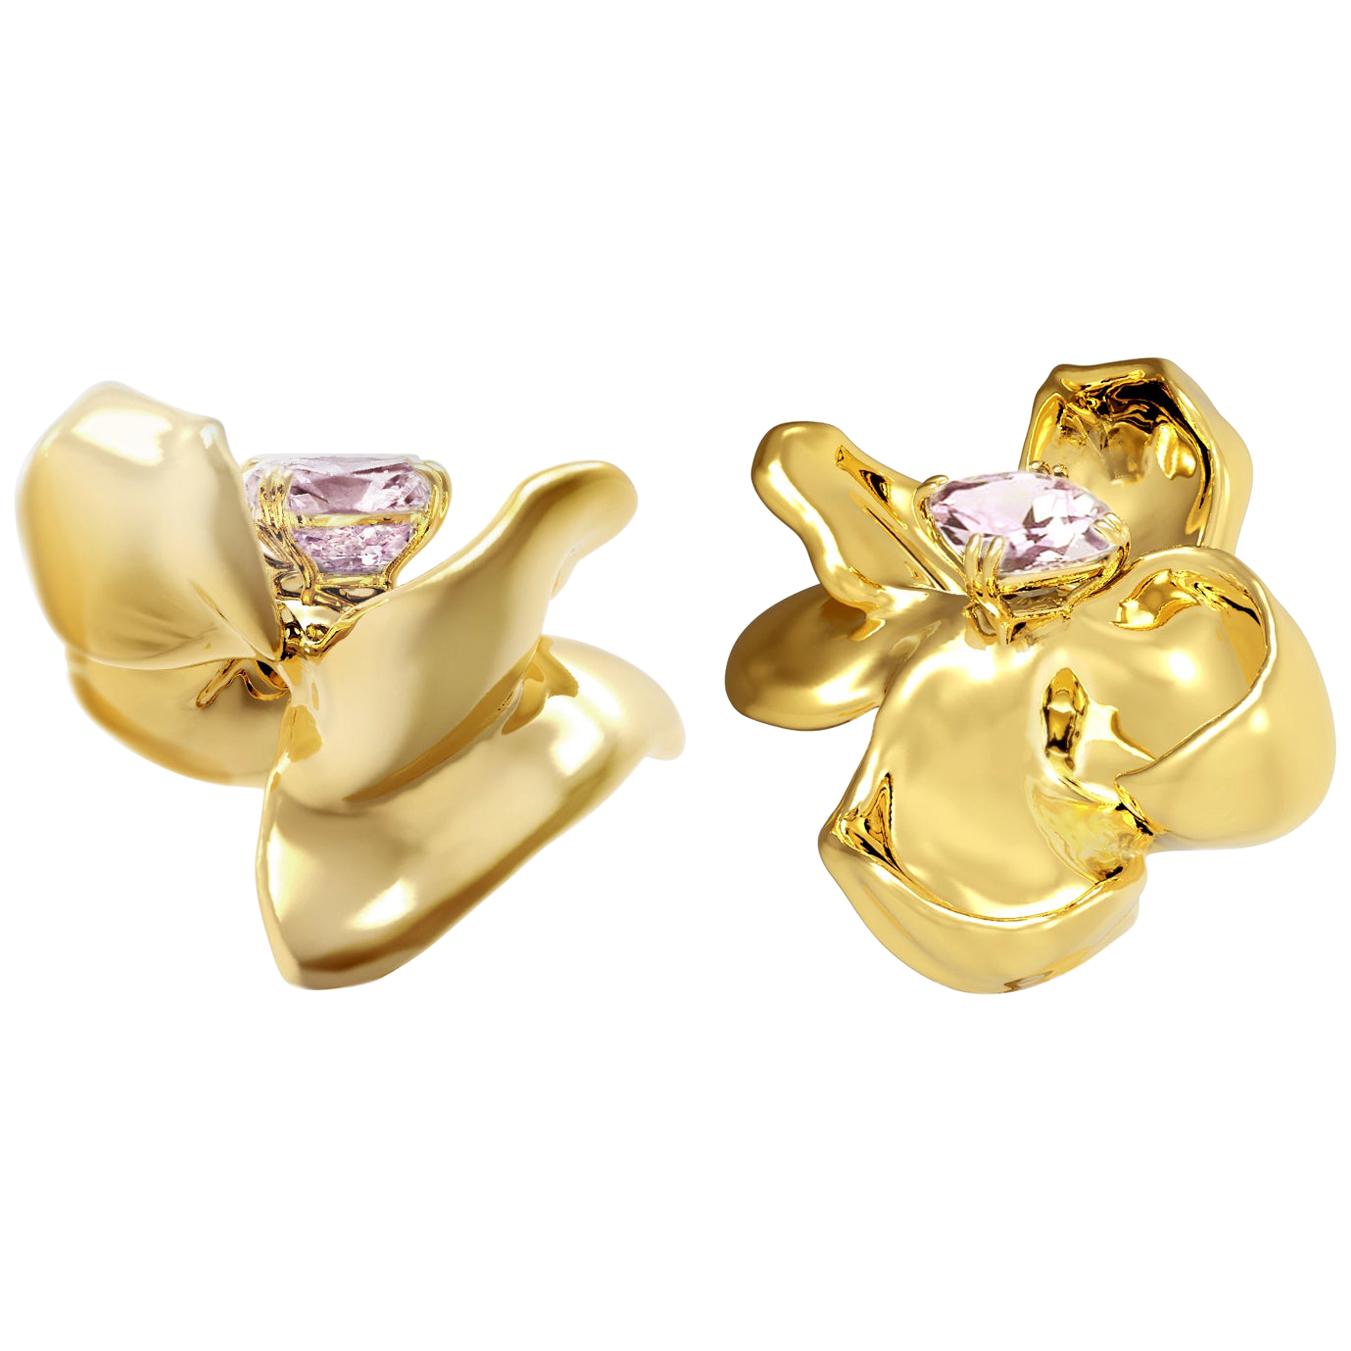 These Magnolia Flower stud earrings are a stunning addition to any jewellery collection. Crafted from 18 karat yellow gold, these earrings feature ink purple cushion spinels that reflect light and add a touch of elegance to any outfit. The design